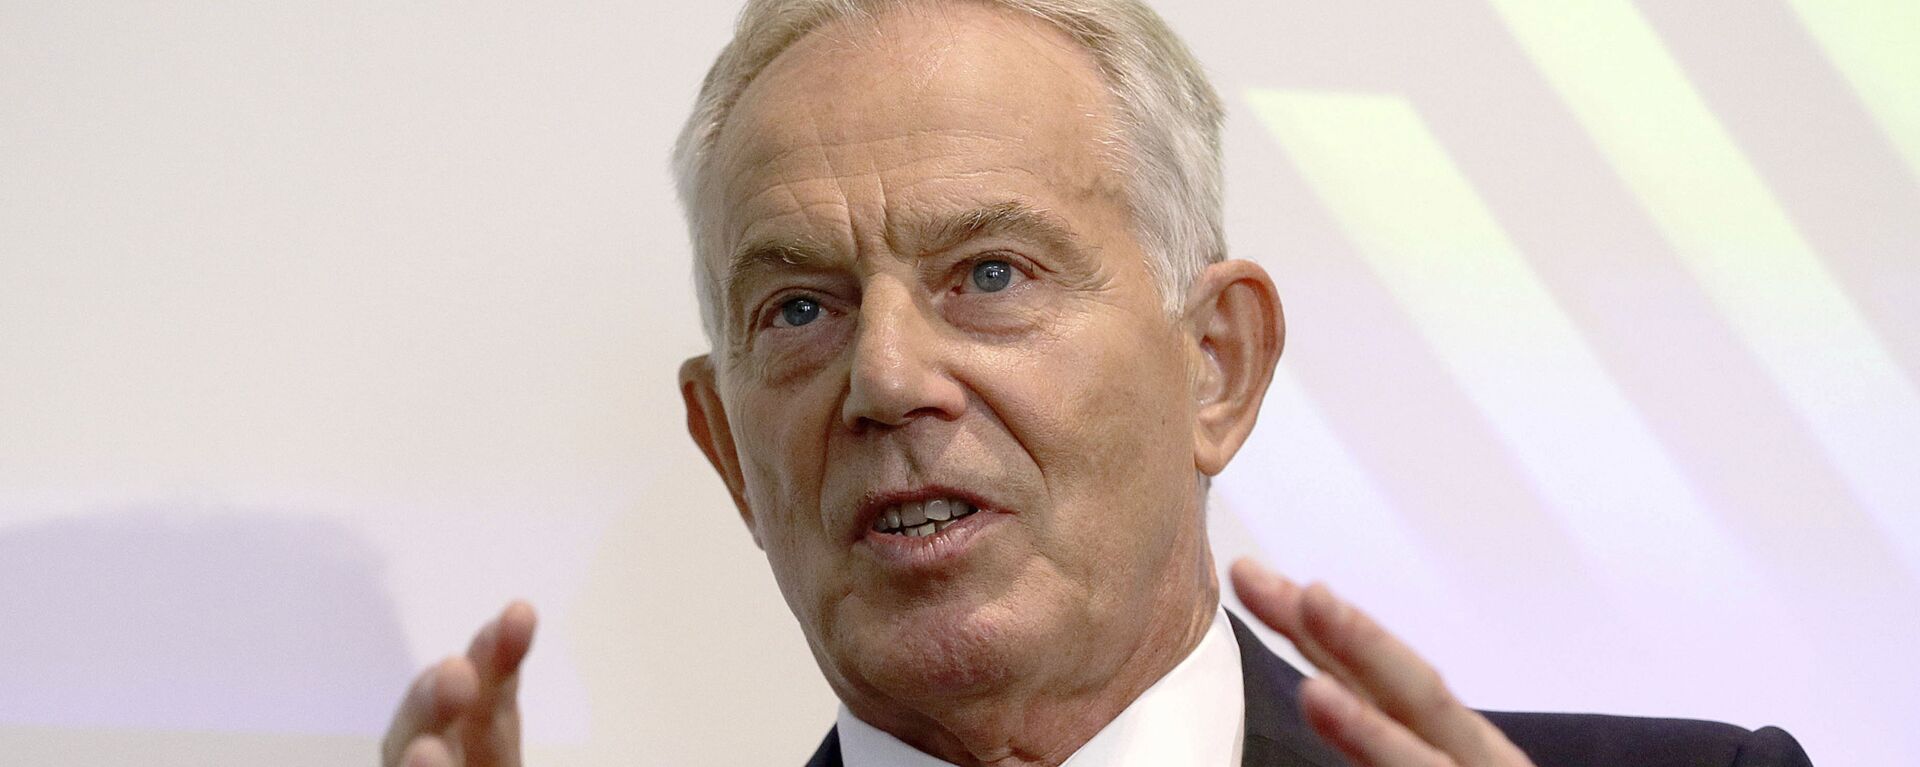 Former British prime minister Tony Blair gives a speech on Brexit at the Institute for Government in central London, on Monday 2 September 2019. - Sputnik International, 1920, 06.09.2021